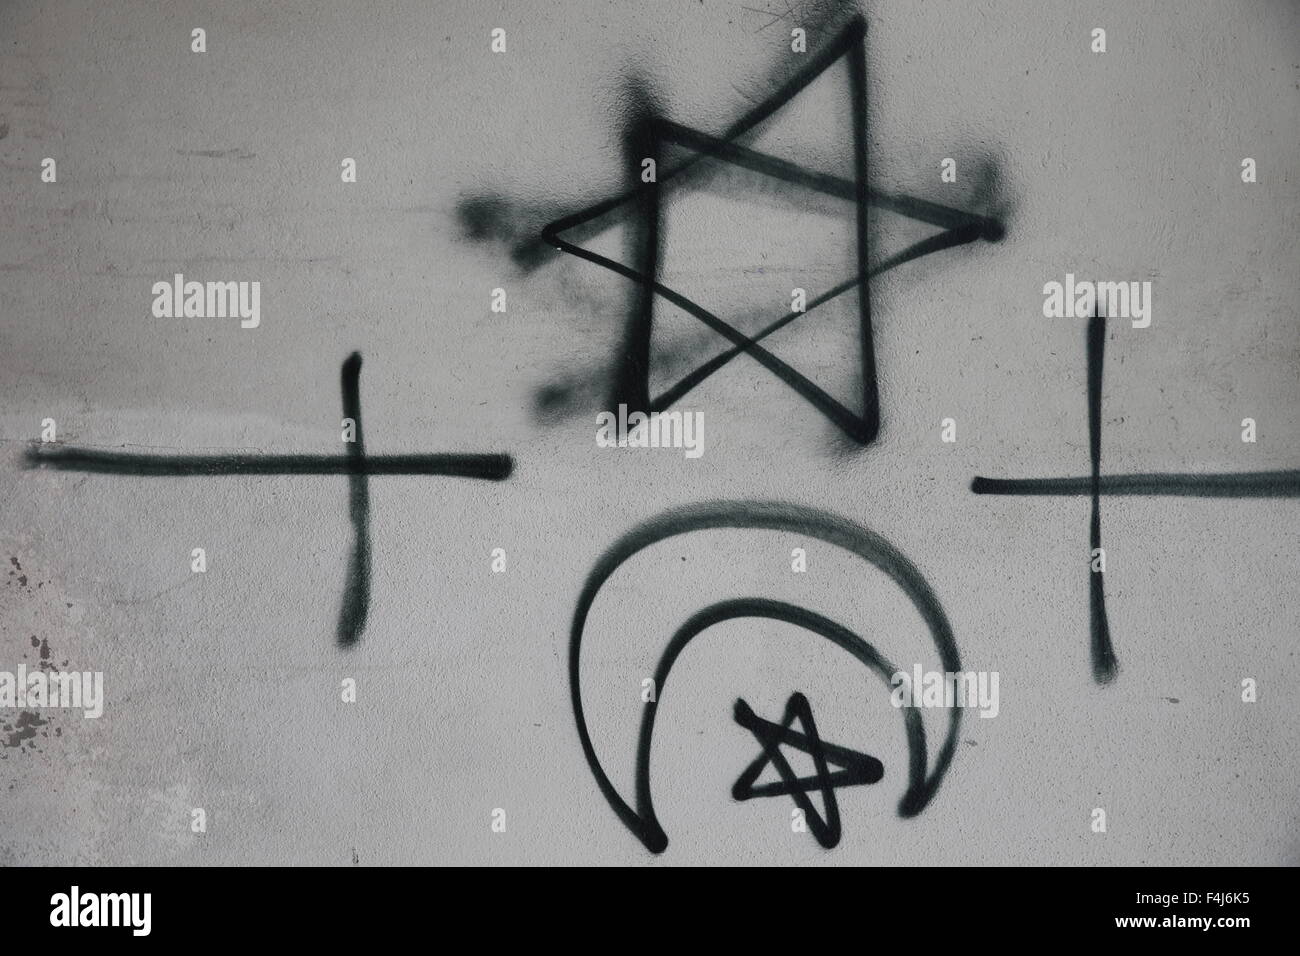 Religious symbols tagged on a wall, Montrouge, Hauts-de-Seine, France, Europe Stock Photo